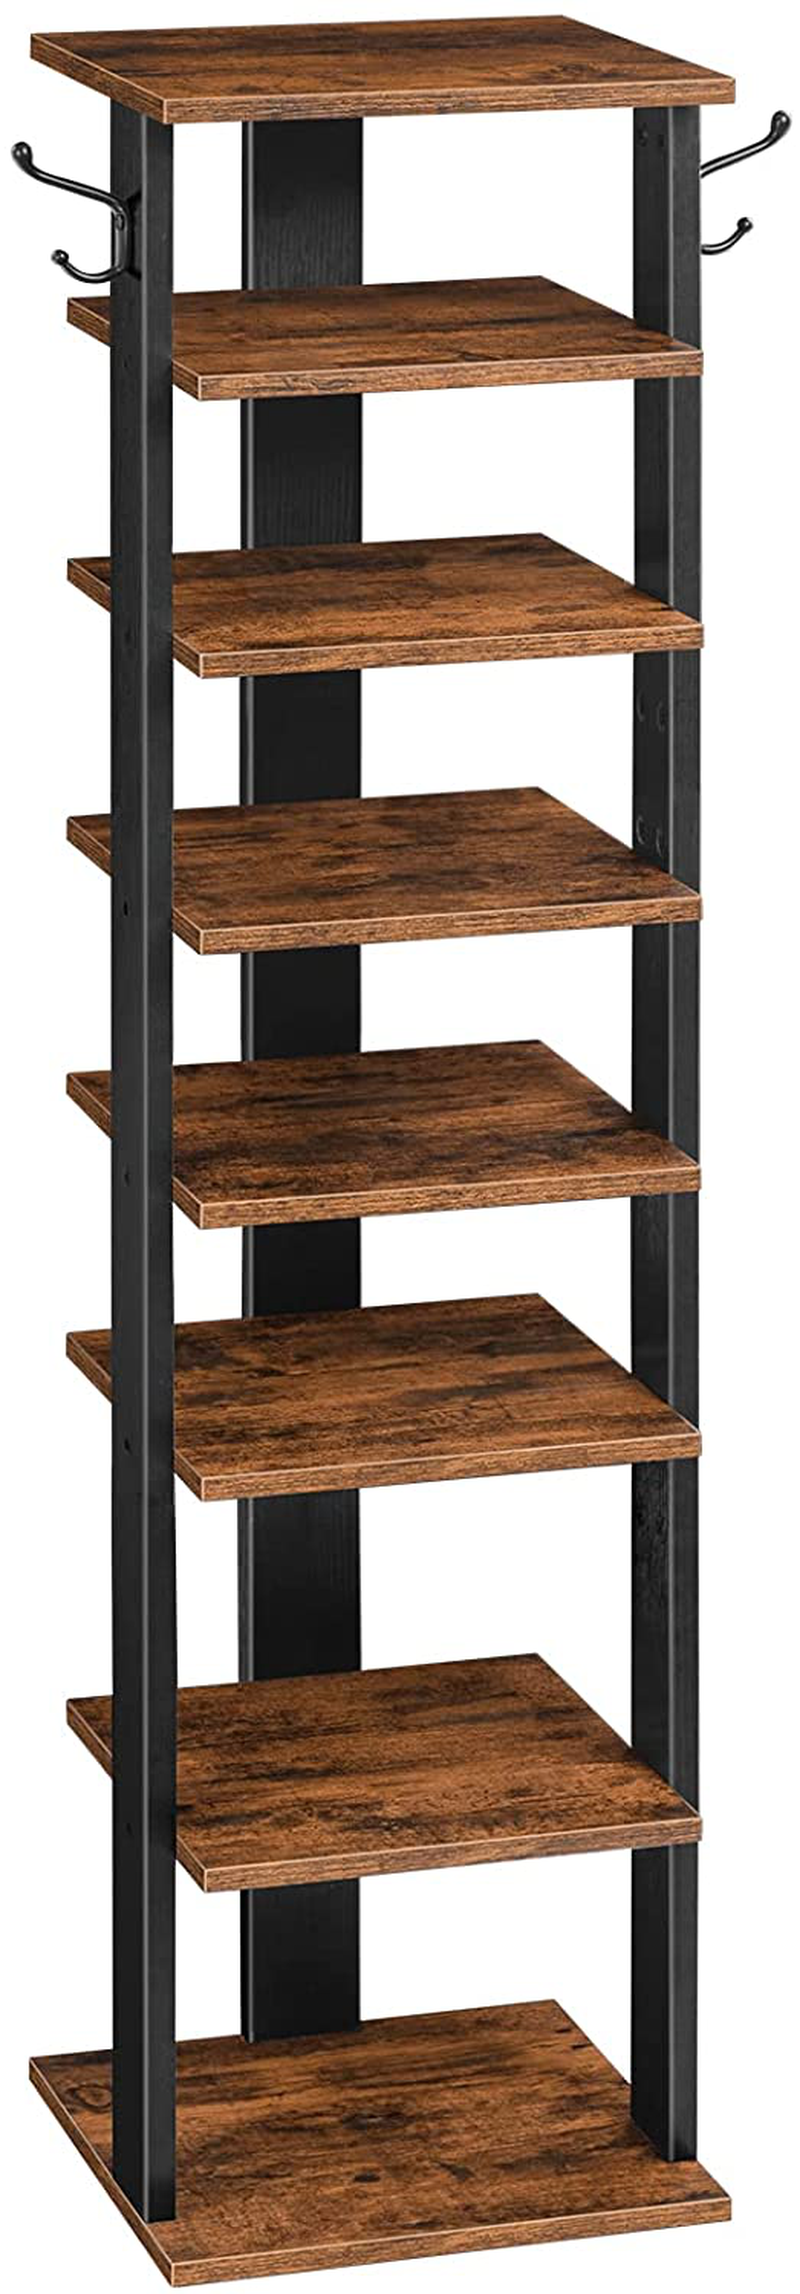 HOOBRO Vertical Shoe Rack, 8 Tier Shoe Storage Organizer with Hooks, Narrow Shoe Rack for 8 Pairs, Space Saving, Stable and Strong, for Entryway, Living Room, Bedroom, Rustic Brown BF07XJ01